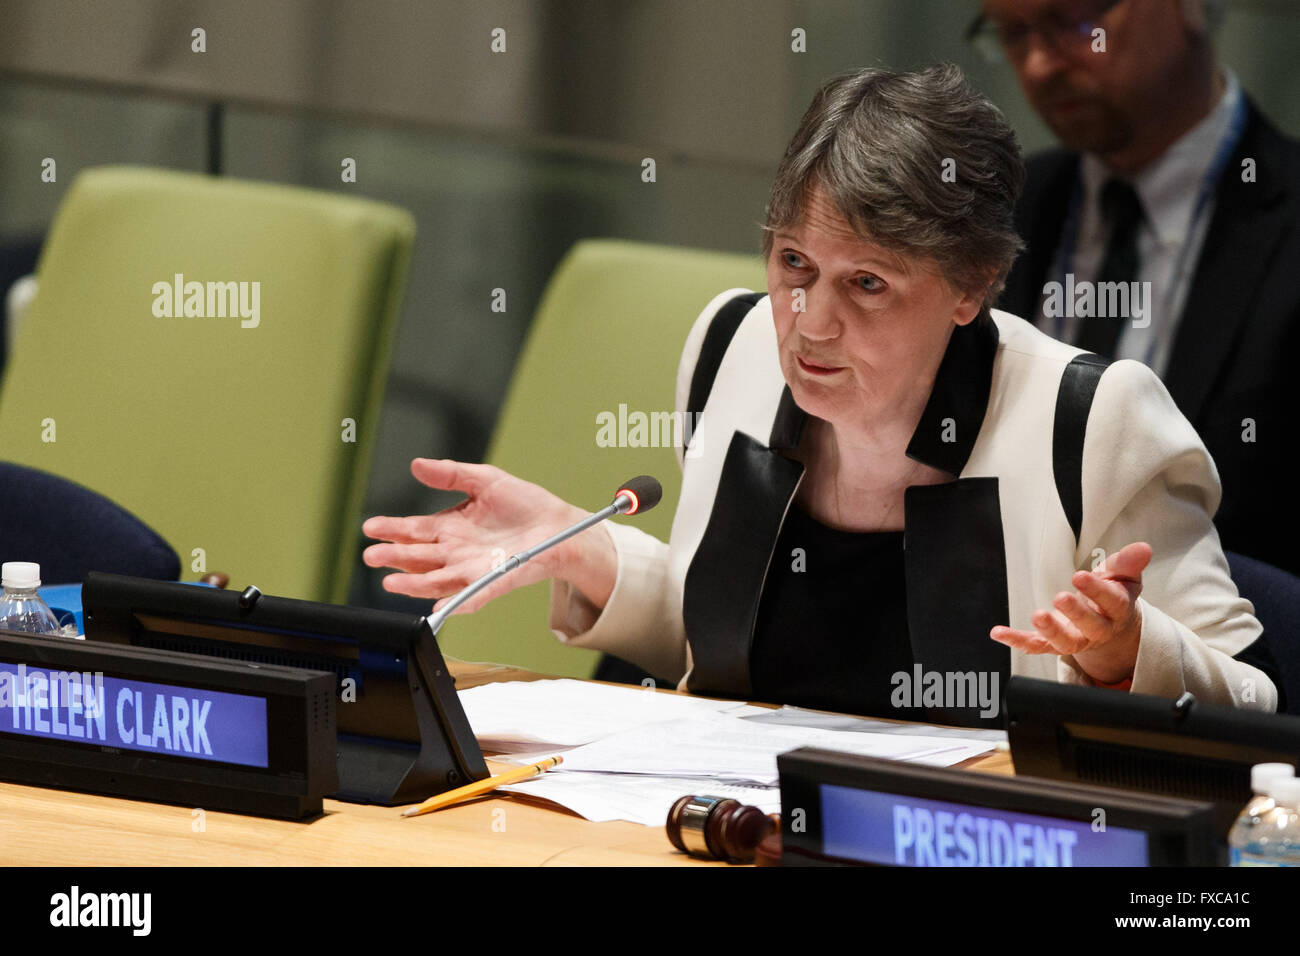 New York, United Nations headquarters in New York. 14th Apr, 2016. Helen Clark, former Prime Minister of New Zealand and Administrator of the United Nations Development Programme (UNDP), candidate for the position of the next secretary-general, presents herself to the member states at the United Nations headquarters in New York, April 14, 2016. The UN General Assembly on Tuesday kicked off a three-day informal dialogue with candidates for the position of the next secretary-general. © Li Muzi/Xinhua/Alamy Live News Stock Photo